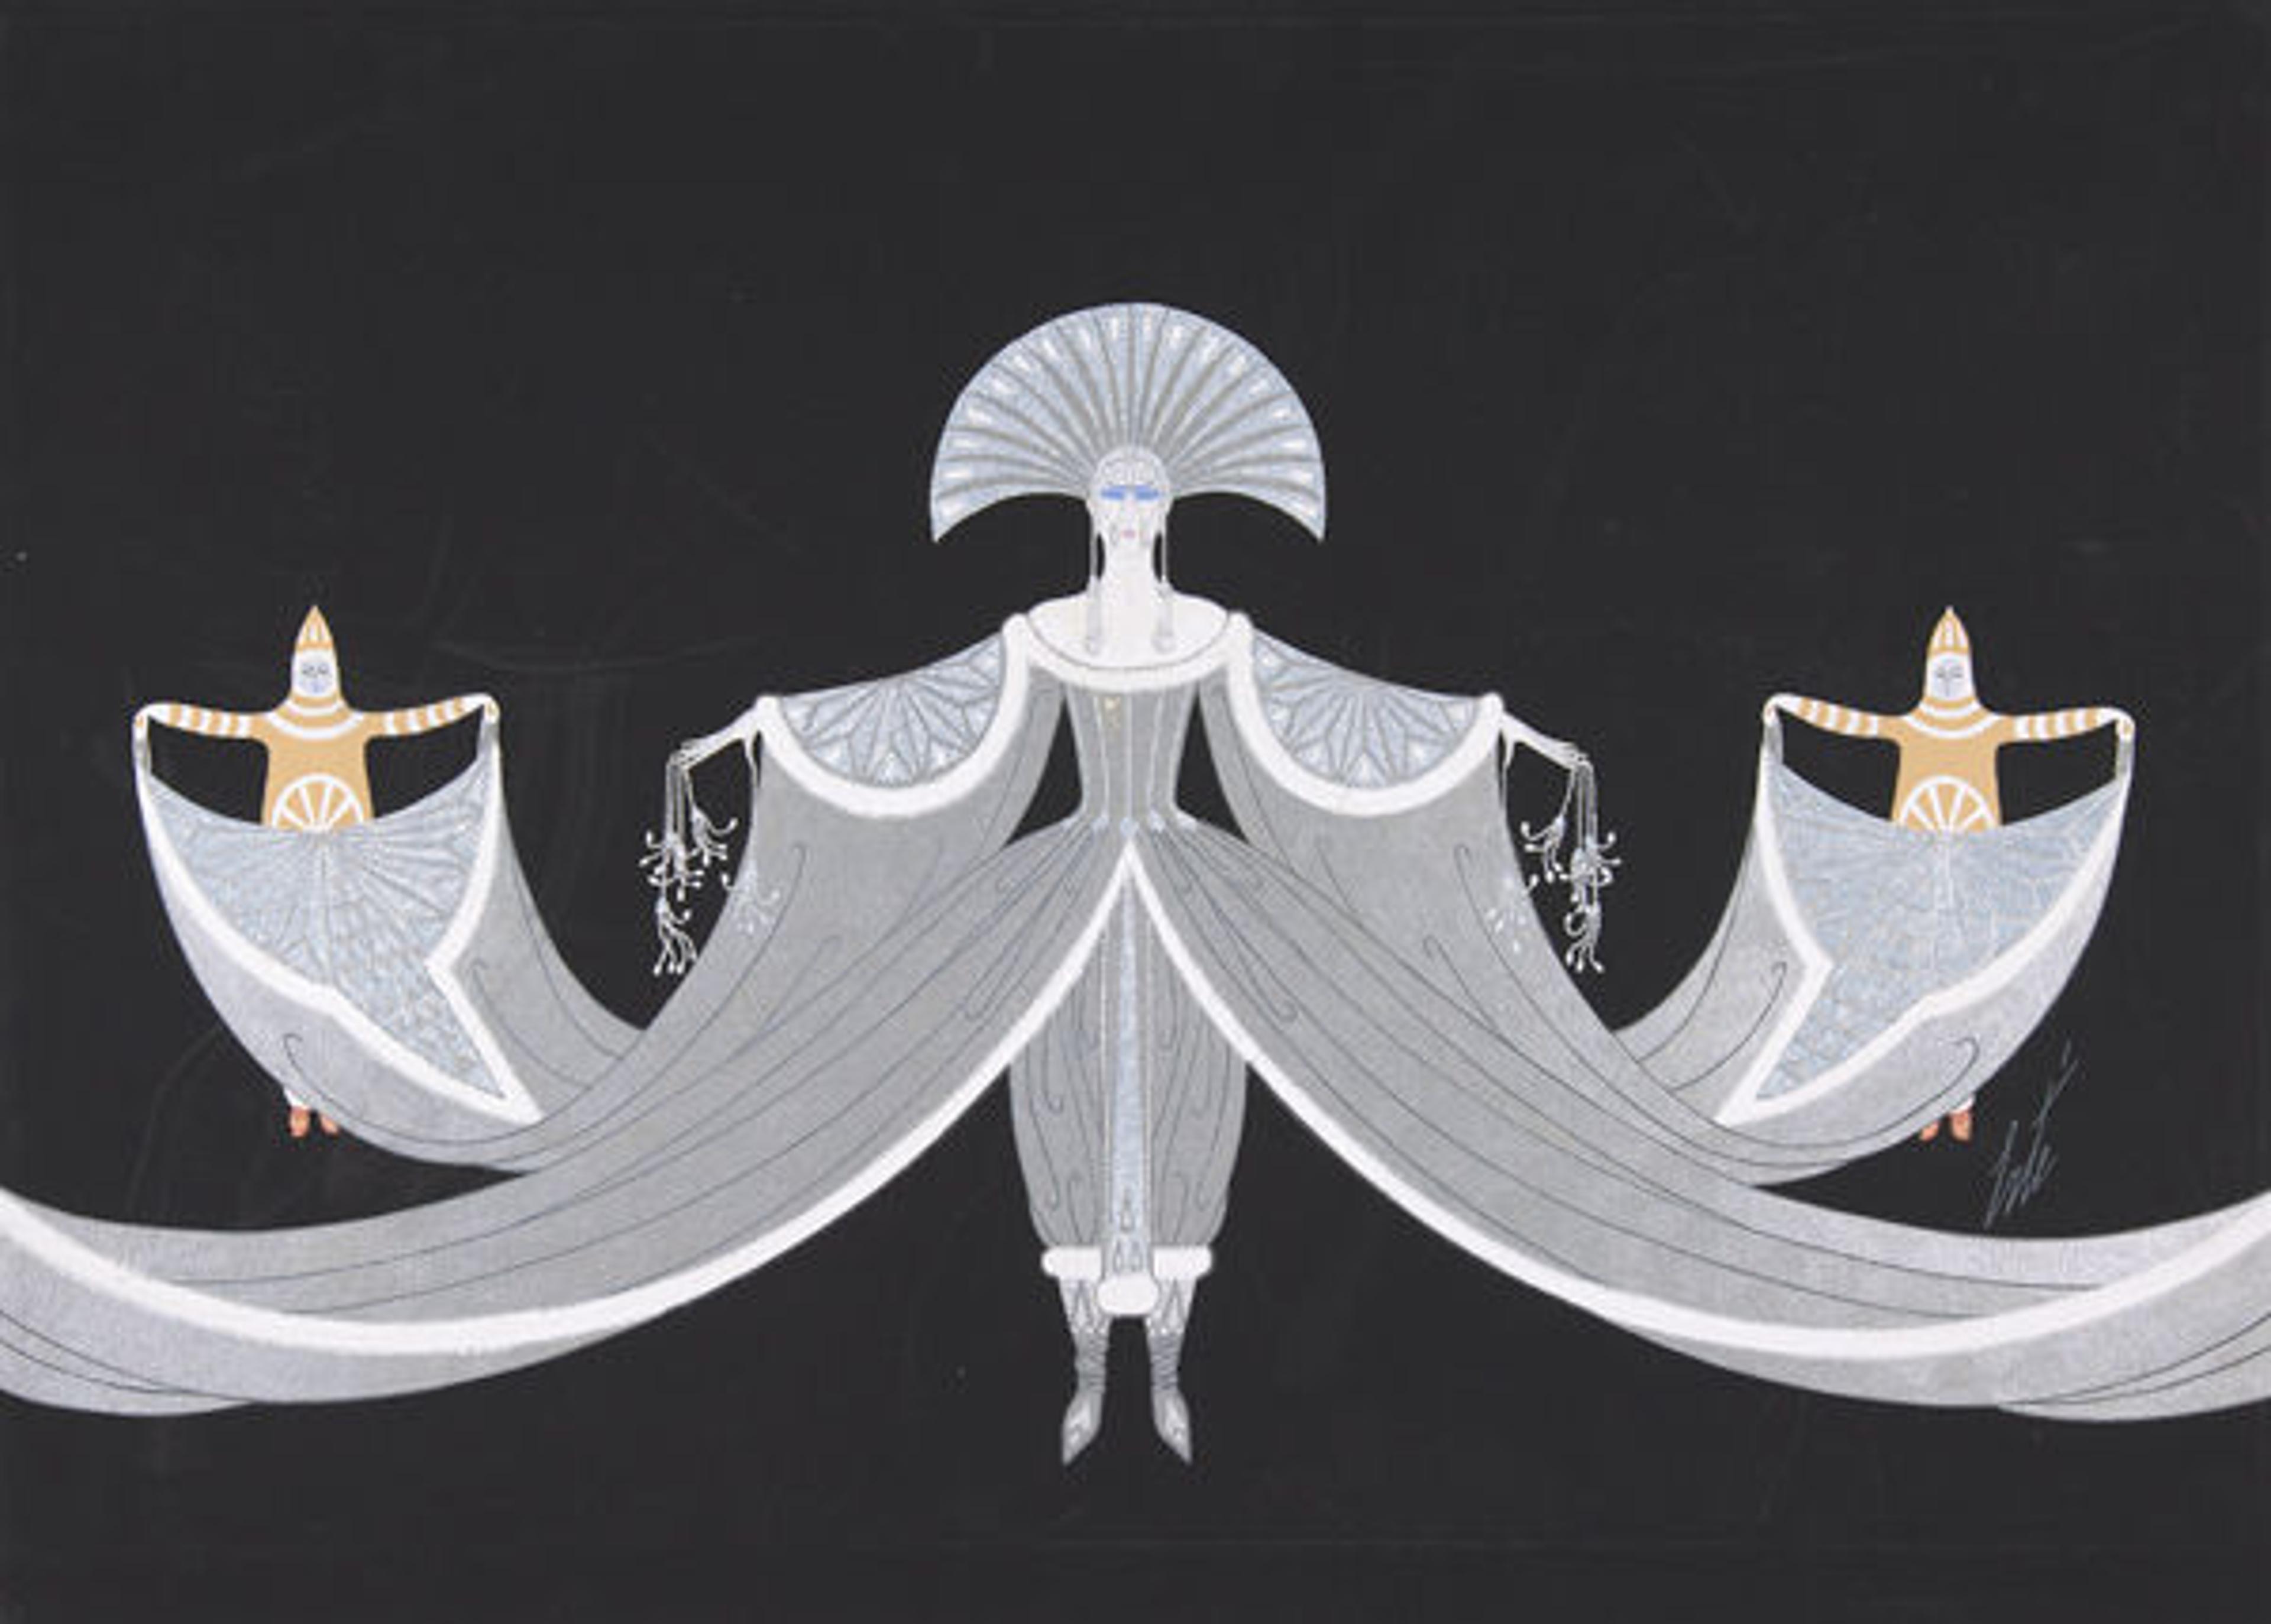 Fig. 4. Erté (Romain de Tirtoff) (French [born Russia], 1892–1990)."La Mer Blanche": Costume Design for "Les Mers," George White's Scandals, New York, 1923. Gouache silver metallic paint on cardboard; 13 3/8 x 18 1/2 in. (34 x 47 cm). The Metropolitan Museum of Art, New York, Purchase, The Martin Foundation Inc. Gift, 1967 (67.762.39). © 2015 Artists Rights Society (ARS) New York